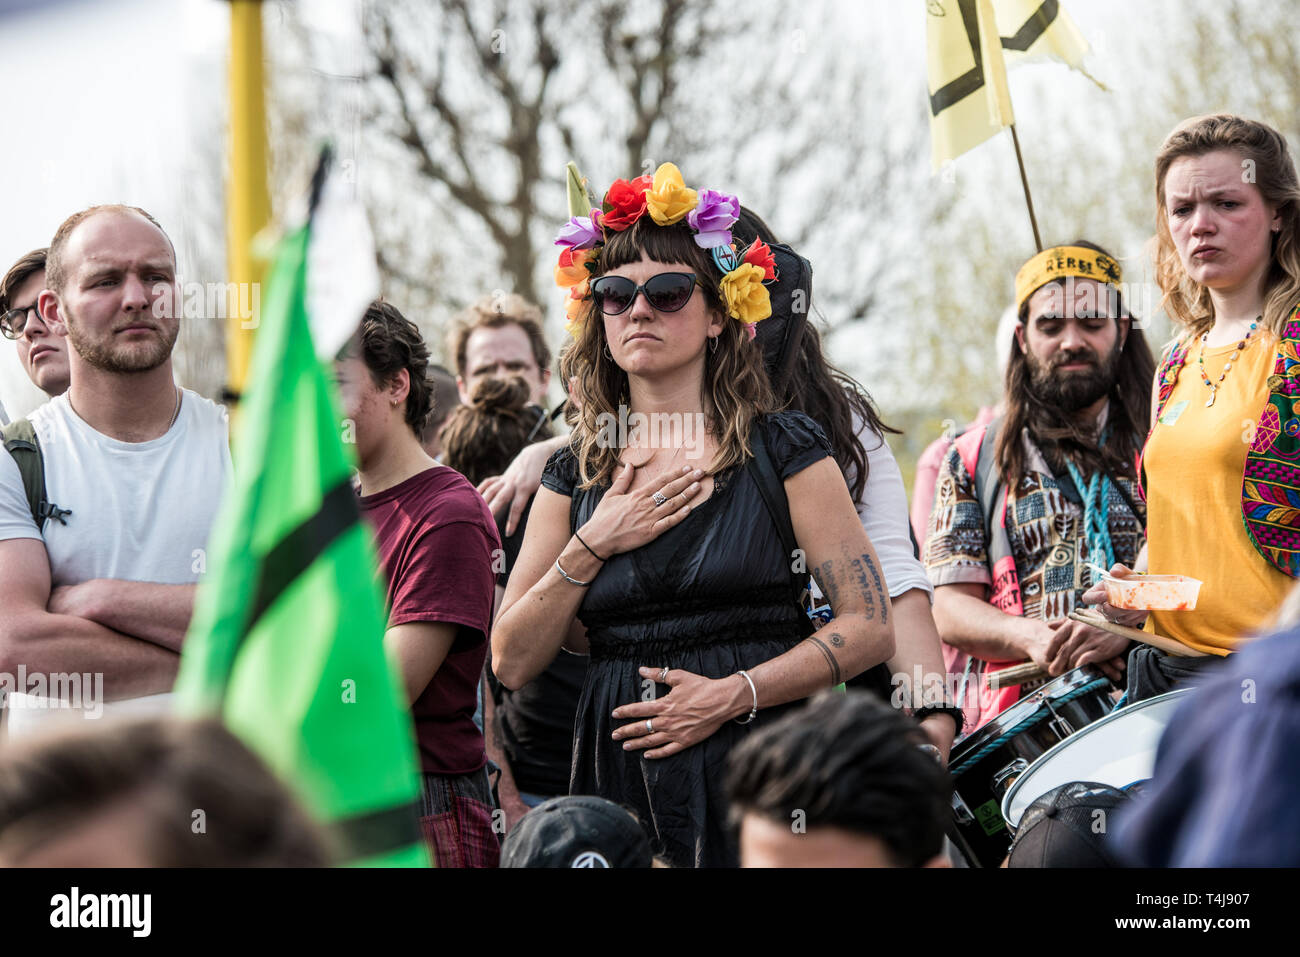 London, UK. 17th Apr, 2019. Protesters seen standing during the Extinction Rebellion strike in London.Extinction Rebellion protesters have blocked five central London landmarks to protest against the government inaction on climate change. Credit: Brais G. Rouco/SOPA Images/ZUMA Wire/Alamy Live News Stock Photo